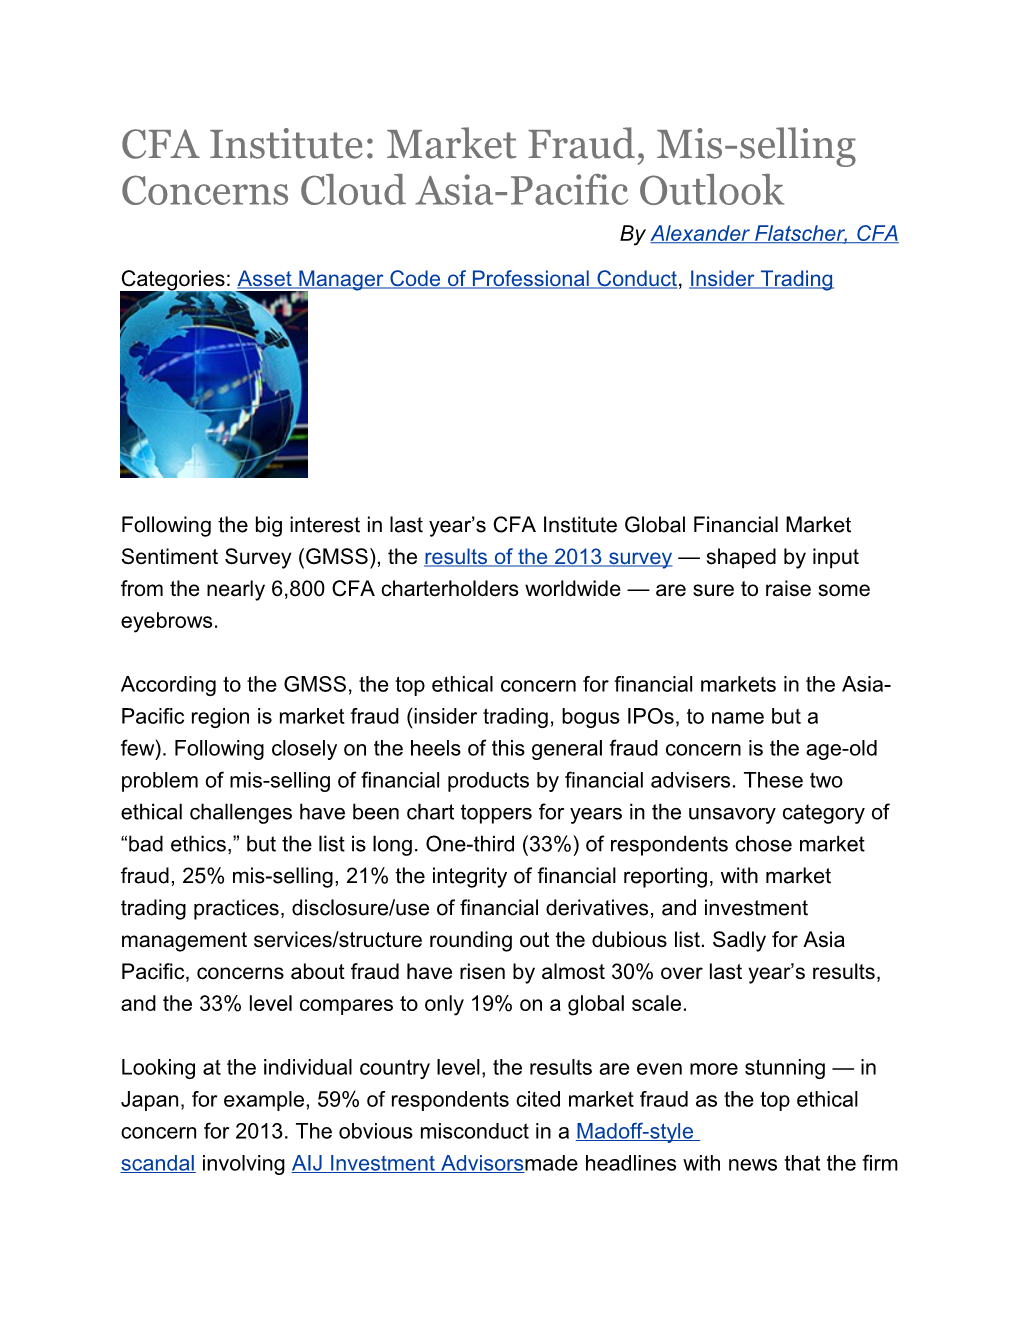 CFA Institute: Market Fraud, Mis-Selling Concerns Cloud Asia-Pacific Outlook